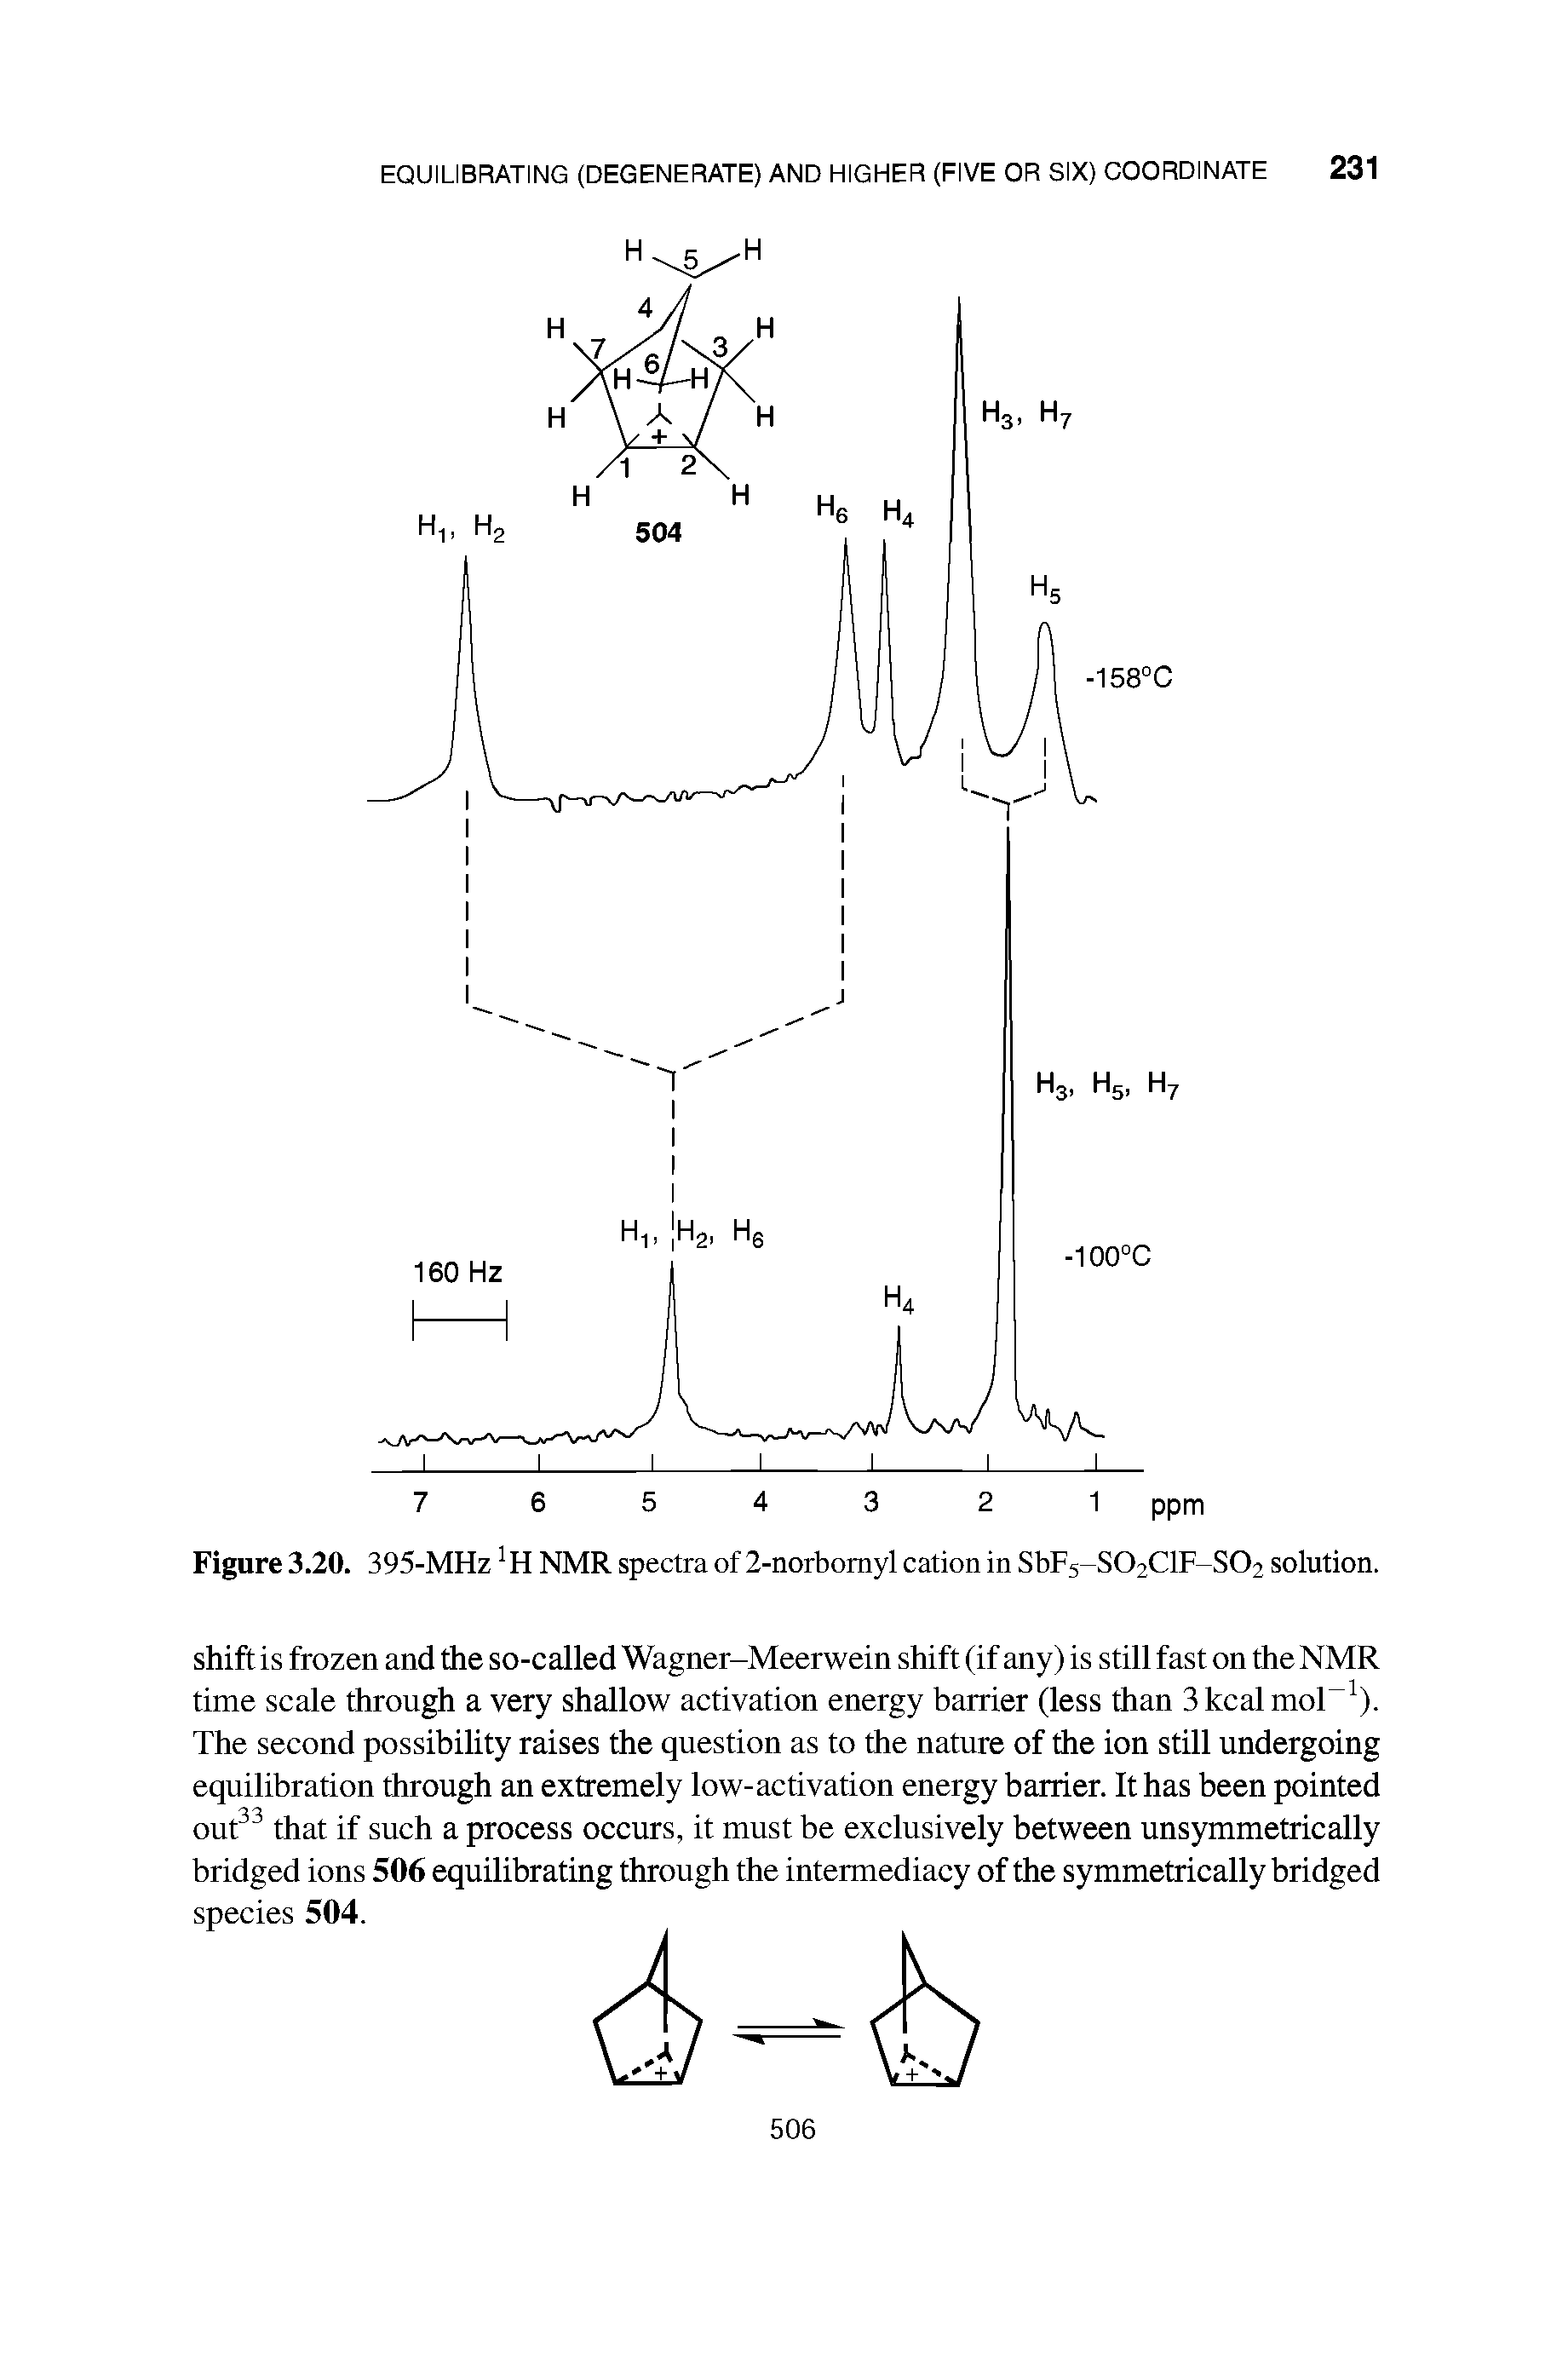 Figure 3.20. 395-MHz1H NMR spectra of 2-norbomyl cation in SbF5-S02ClF-S02 solution.